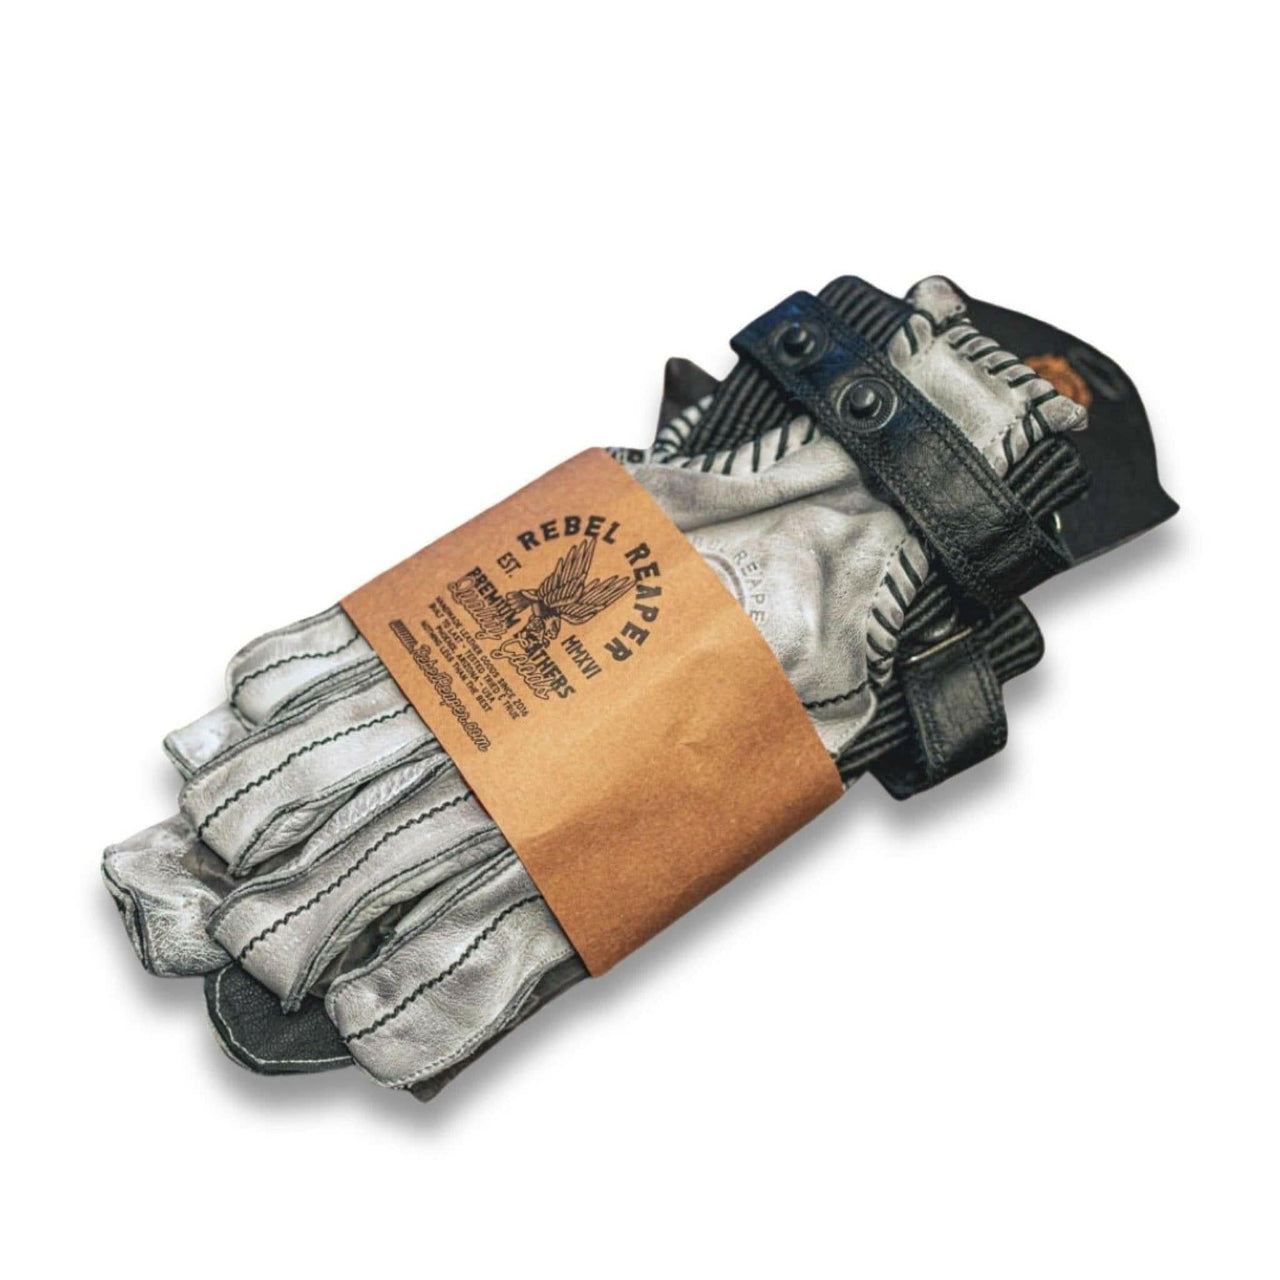 Leather Motorcycle Riding Gloves - Modern Roper - Distressed White